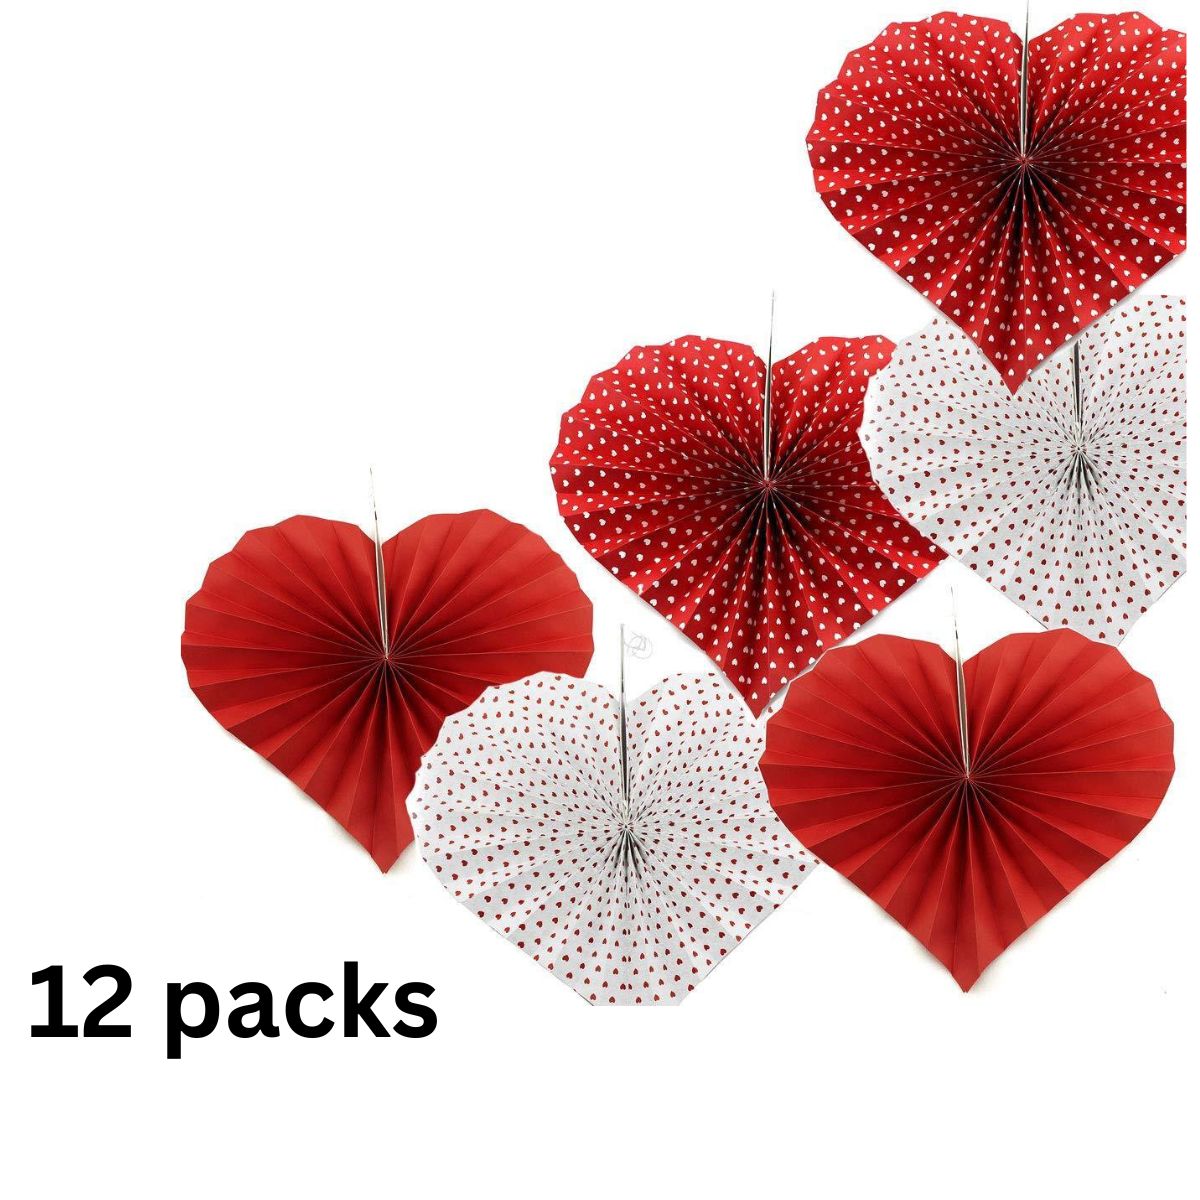 Decorated Heart Shaped Paper Fans Decorations 12 packs